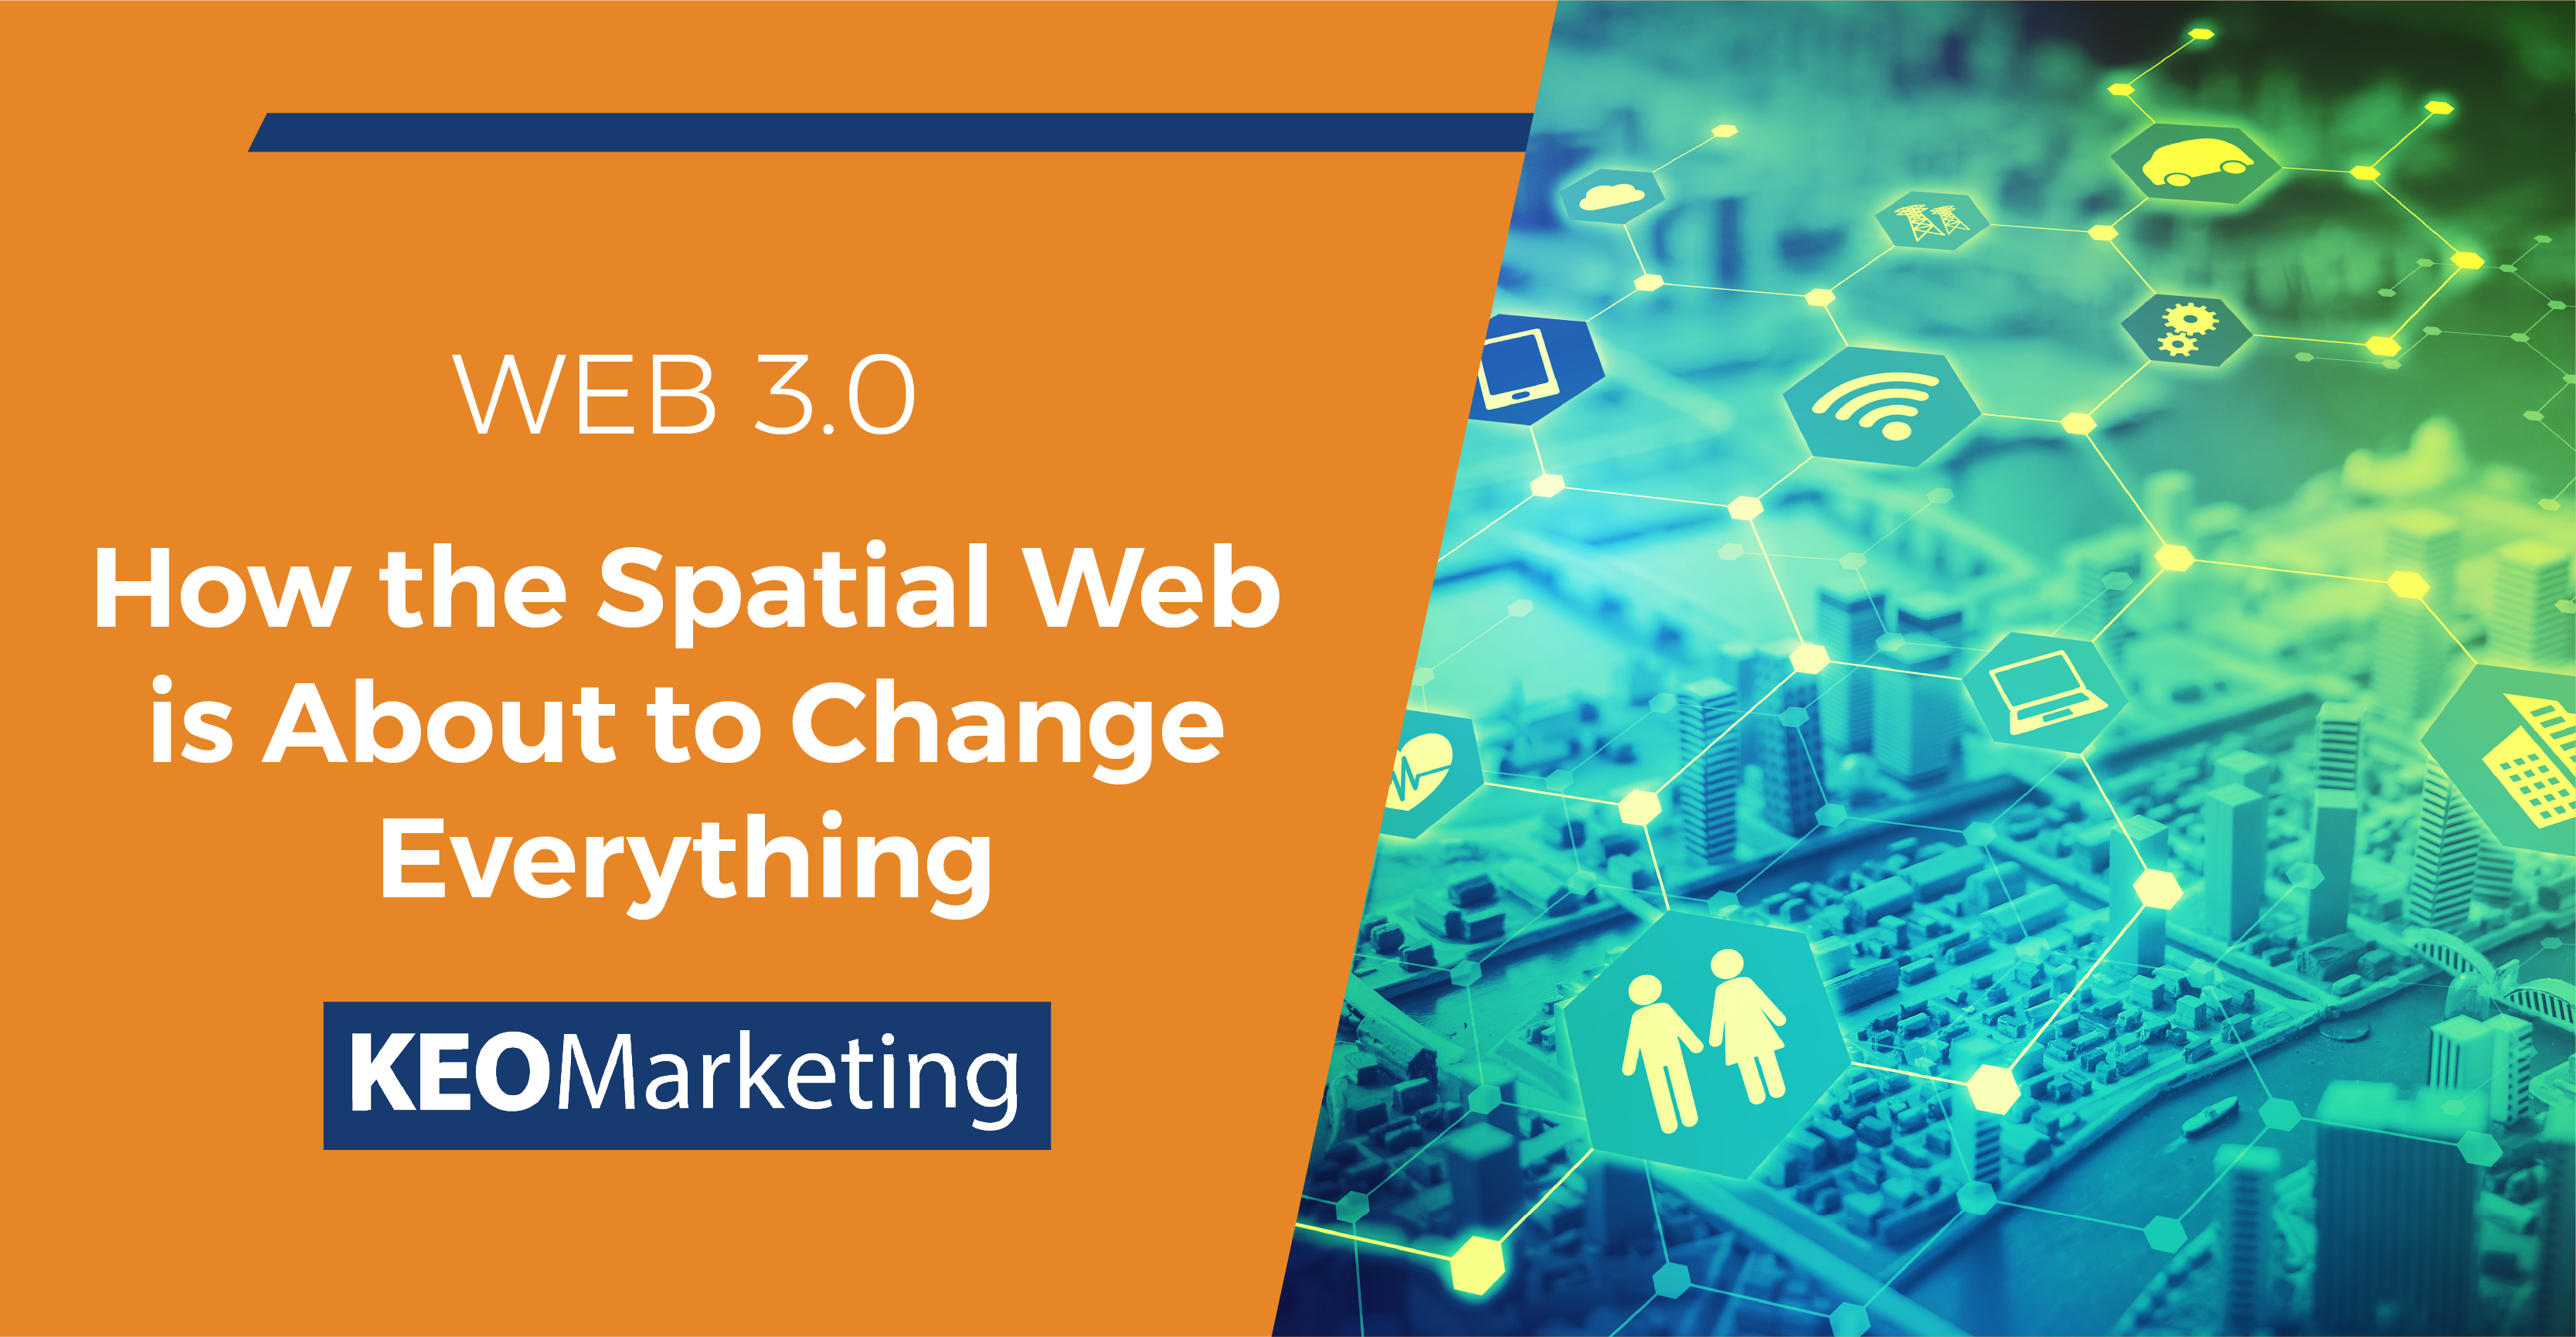 What Will Web 3.0, The Spatial Web Change?